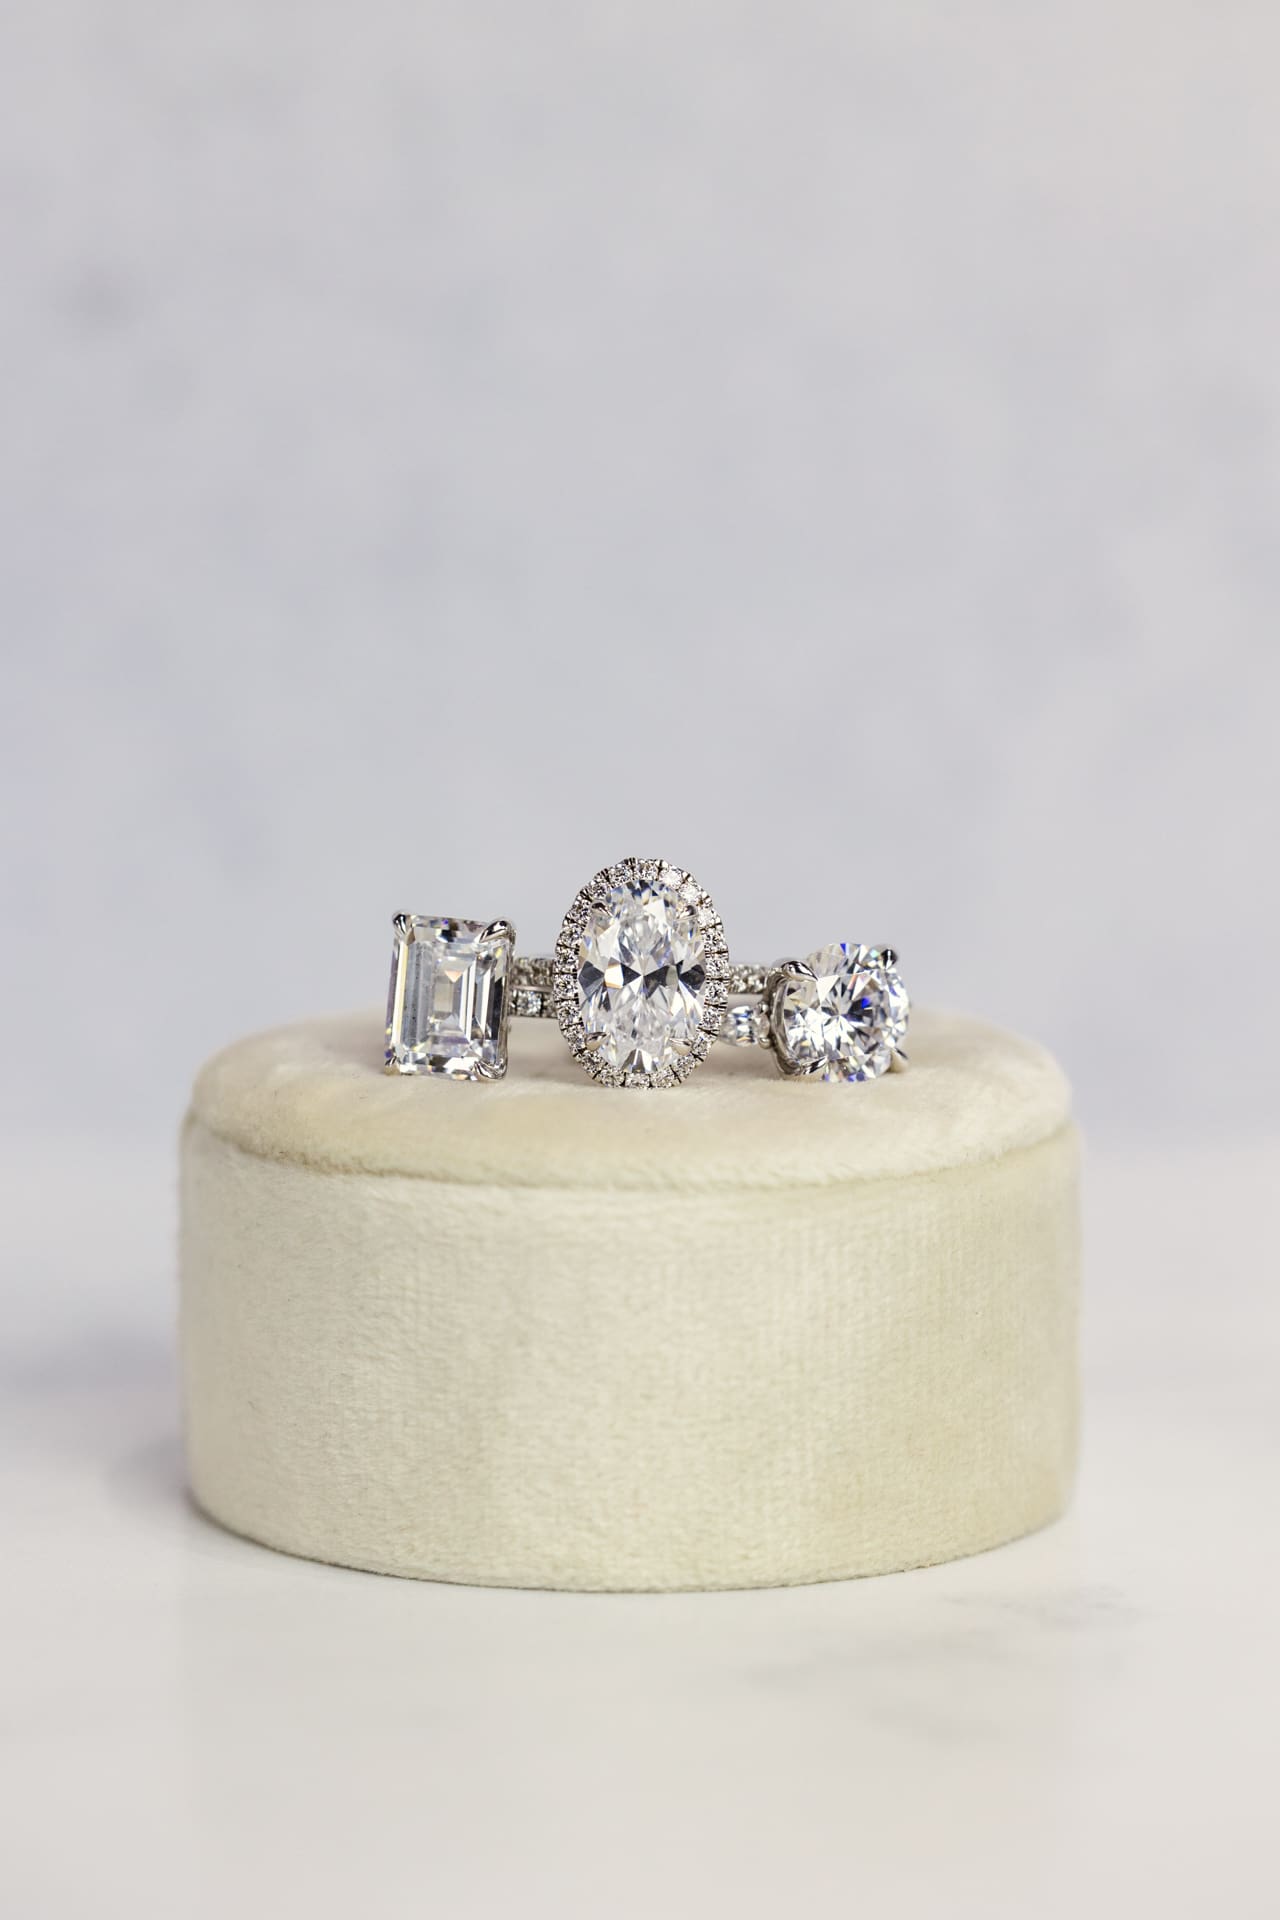 Detail photo of three unique diamond rings sitting on white velvet ring box with dove gray background at Chicago photography studio P&M Studio